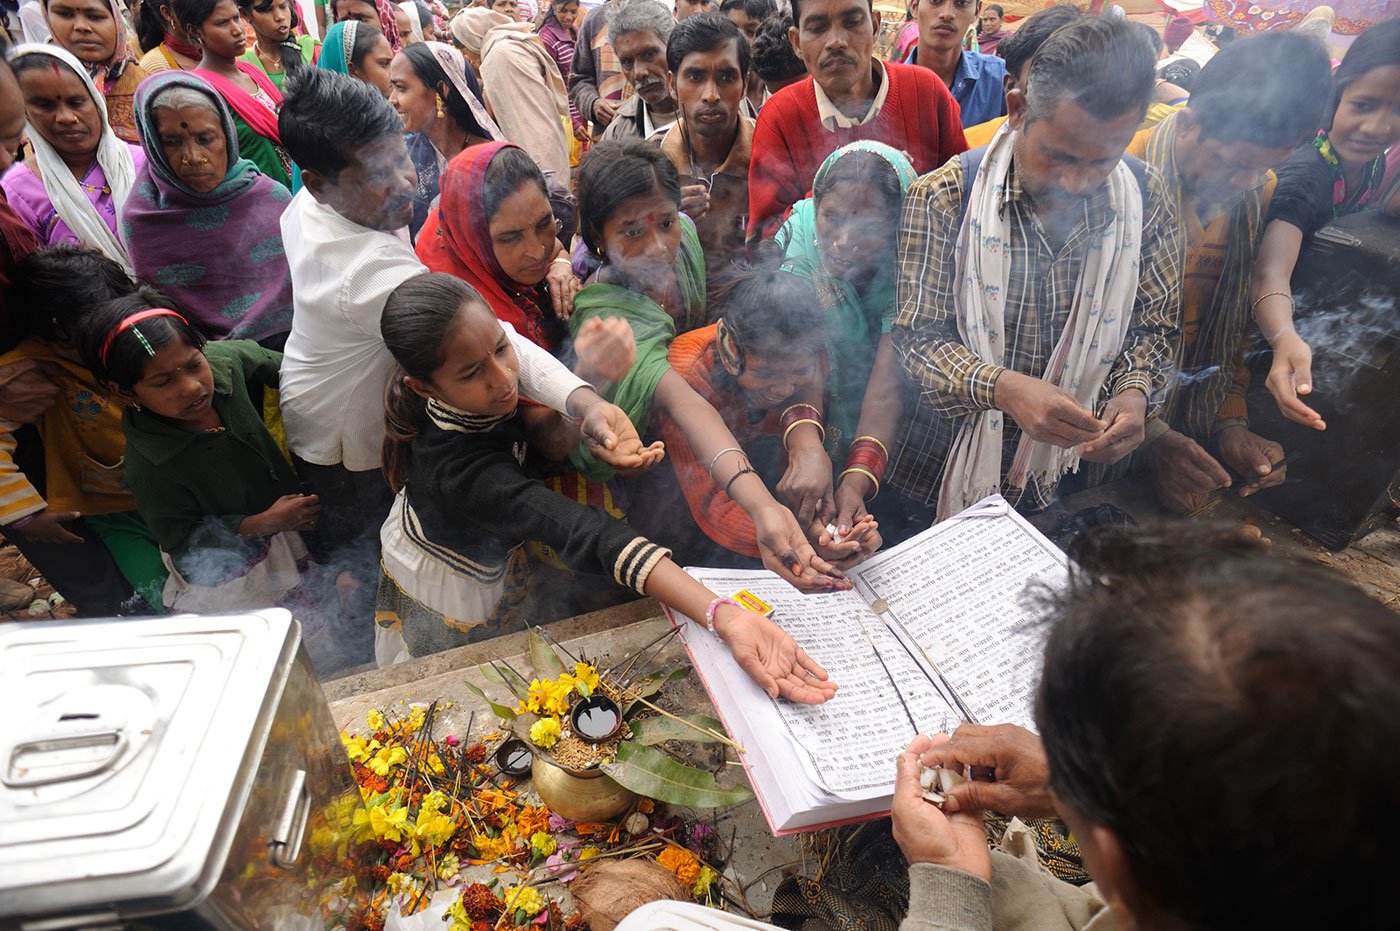 People gathered at the Bhajan mela paying their respects to the Ramcharitmanas